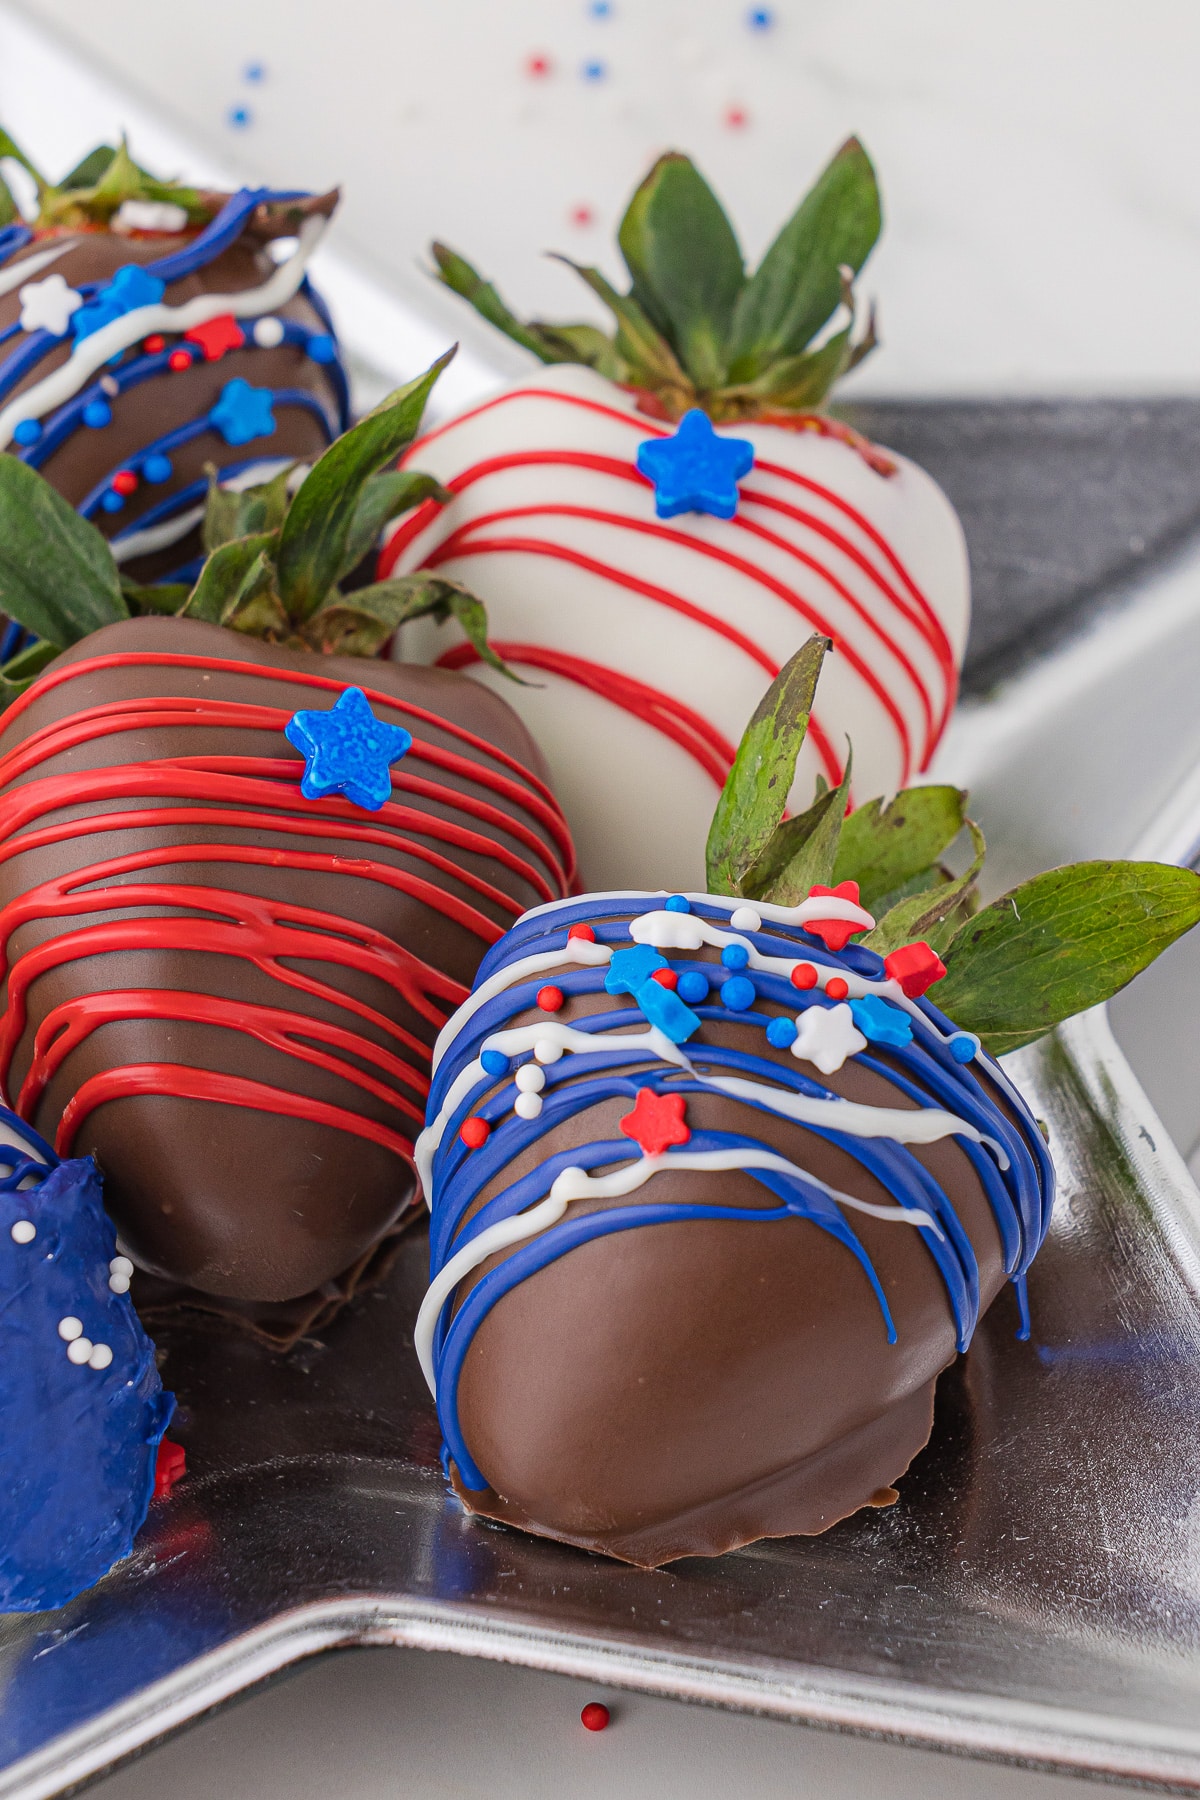 Close up of 5 chocolate covered strawberries plated on a silver star dish, and with red, white and blue edible striping, stars and sprinkles